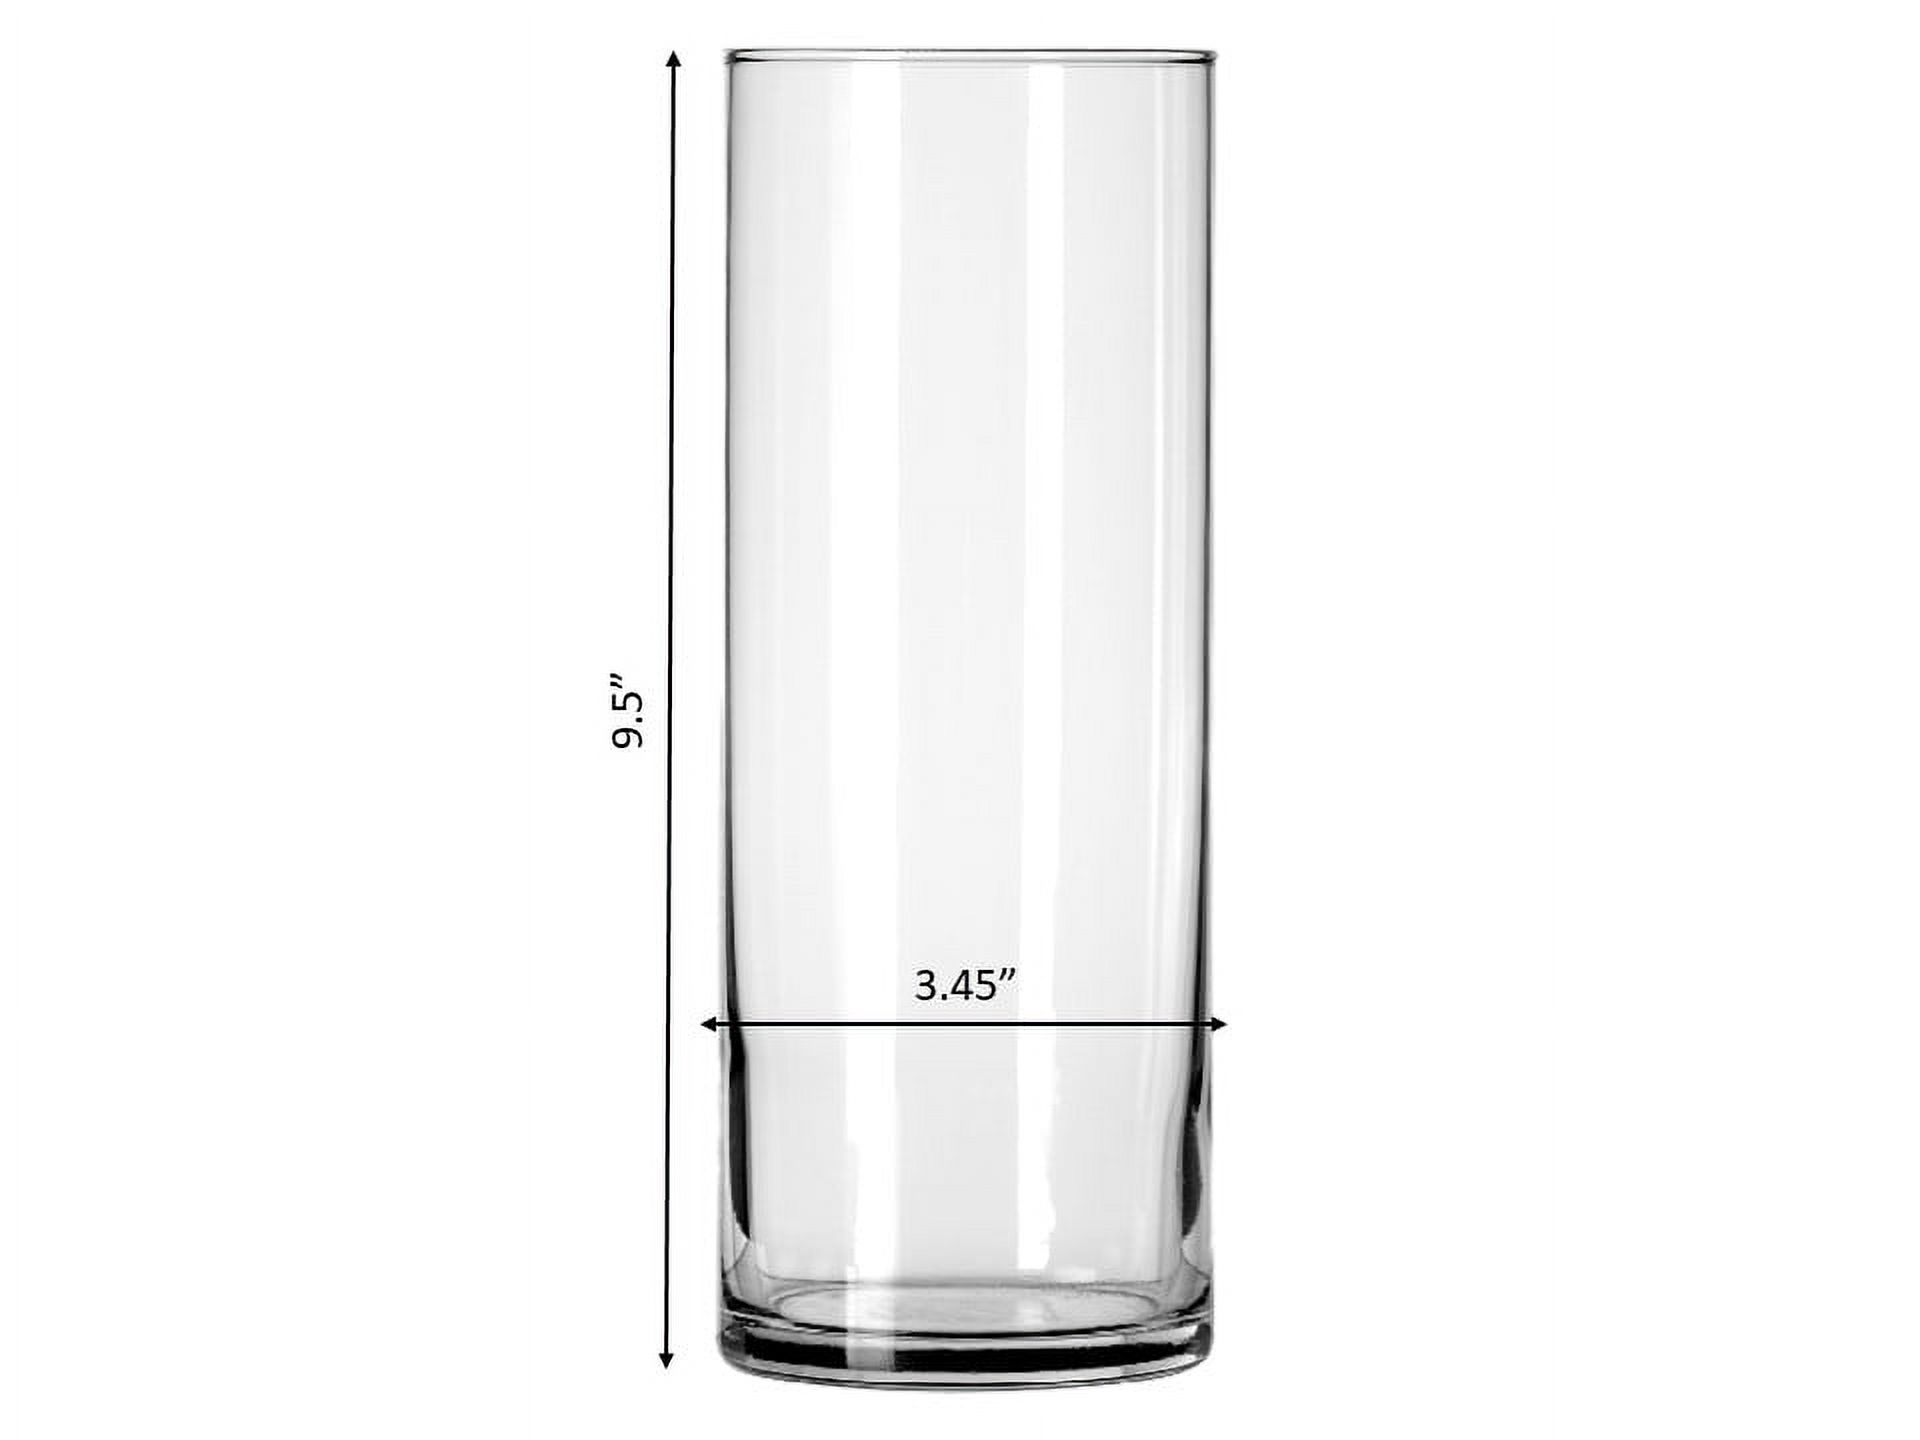 Libbey Clear Glass 9.5" Cylinder Vase - image 5 of 5